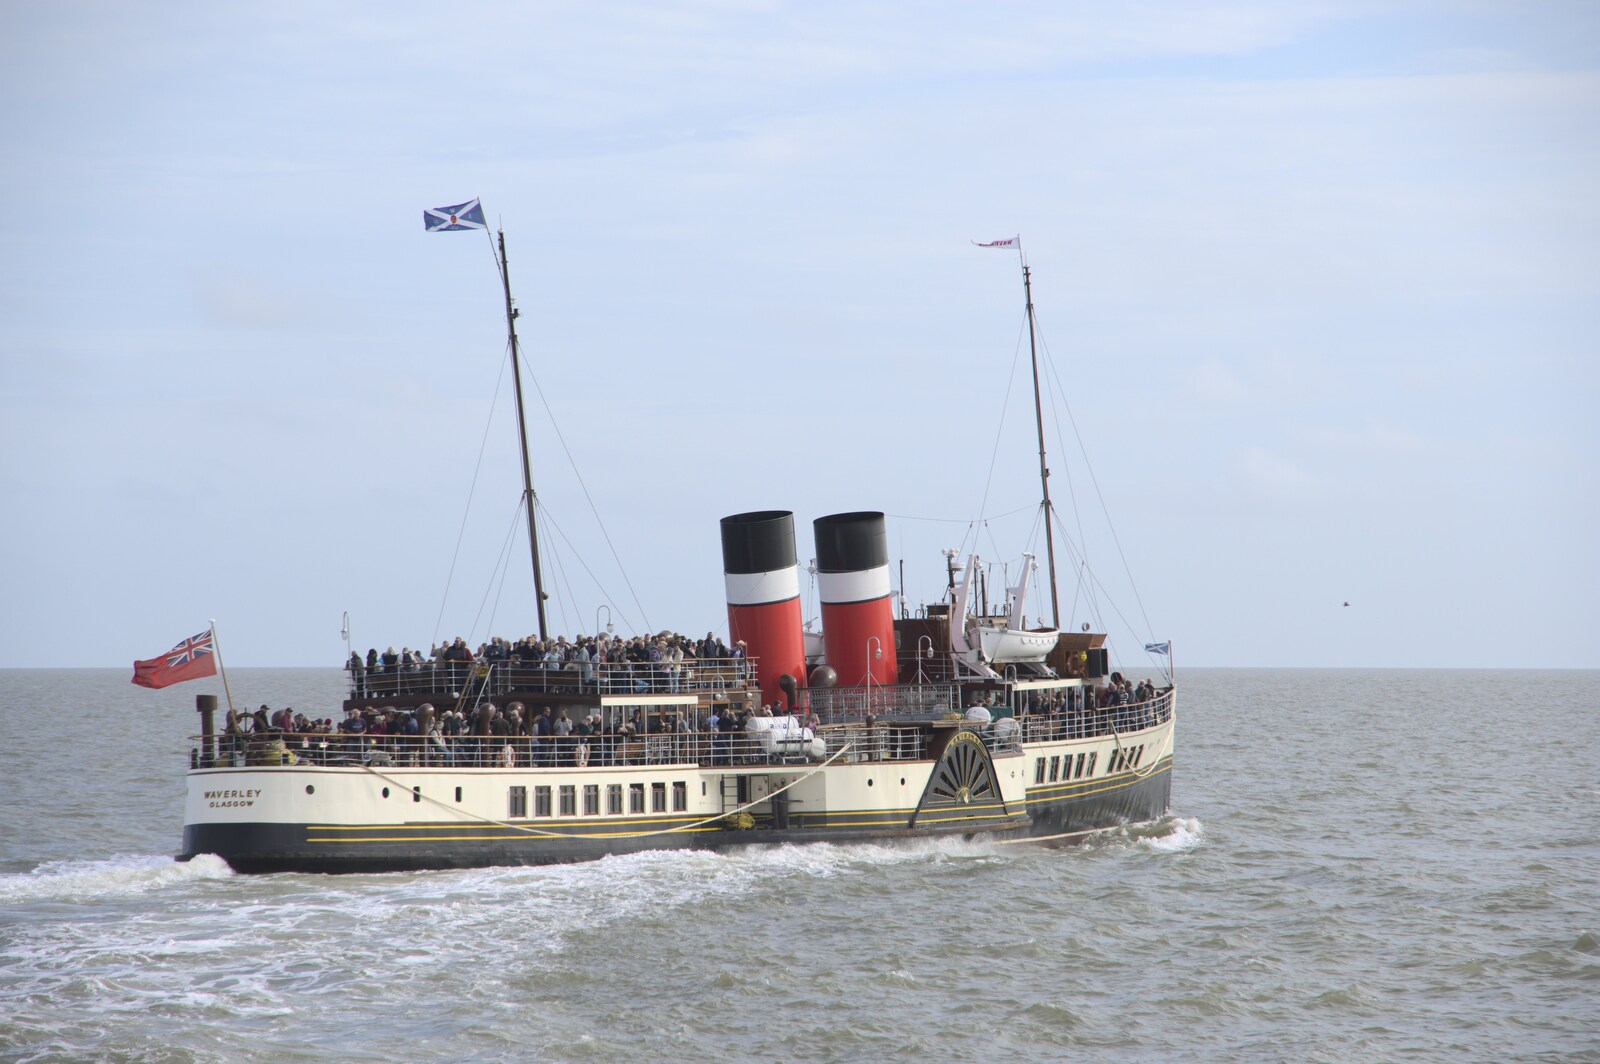 The paddle steamer turns round to head to London from The Waverley Paddle Steamer at Southwold Pier, Suffolk - 27th September 2023